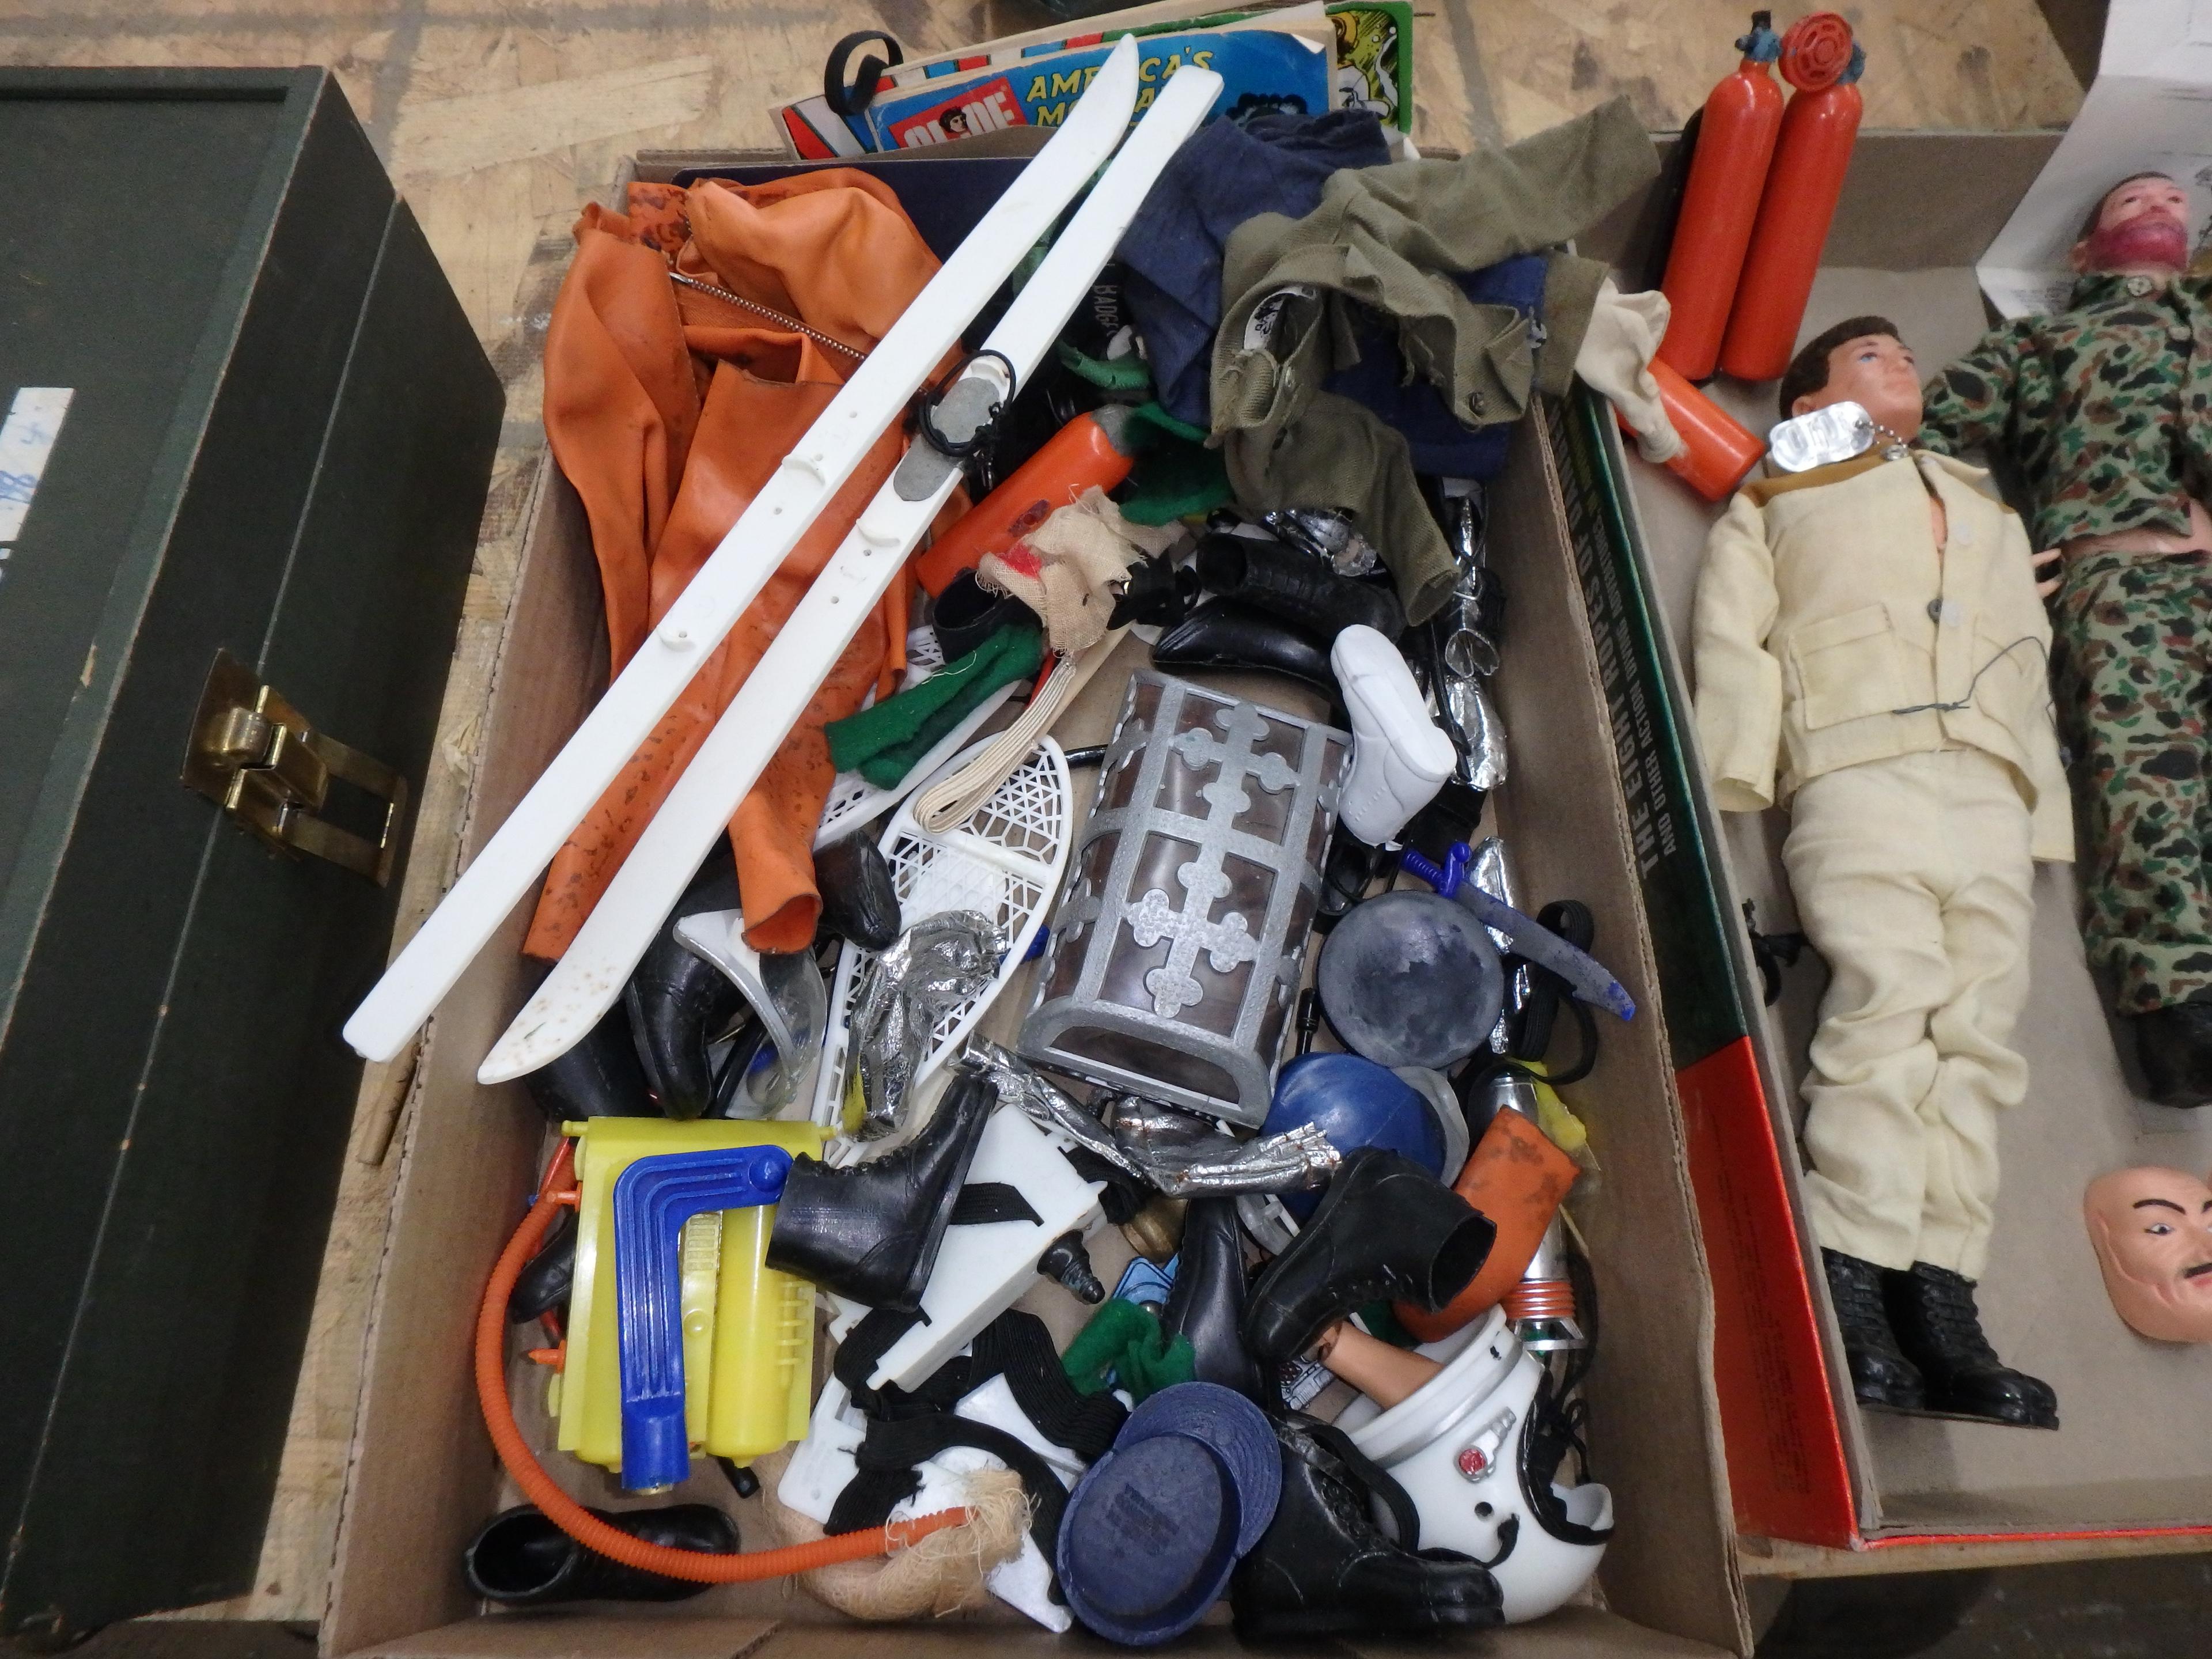 GI Joe dolls, wood storage box, clothing and accessories, including guns, space suits and wet suits